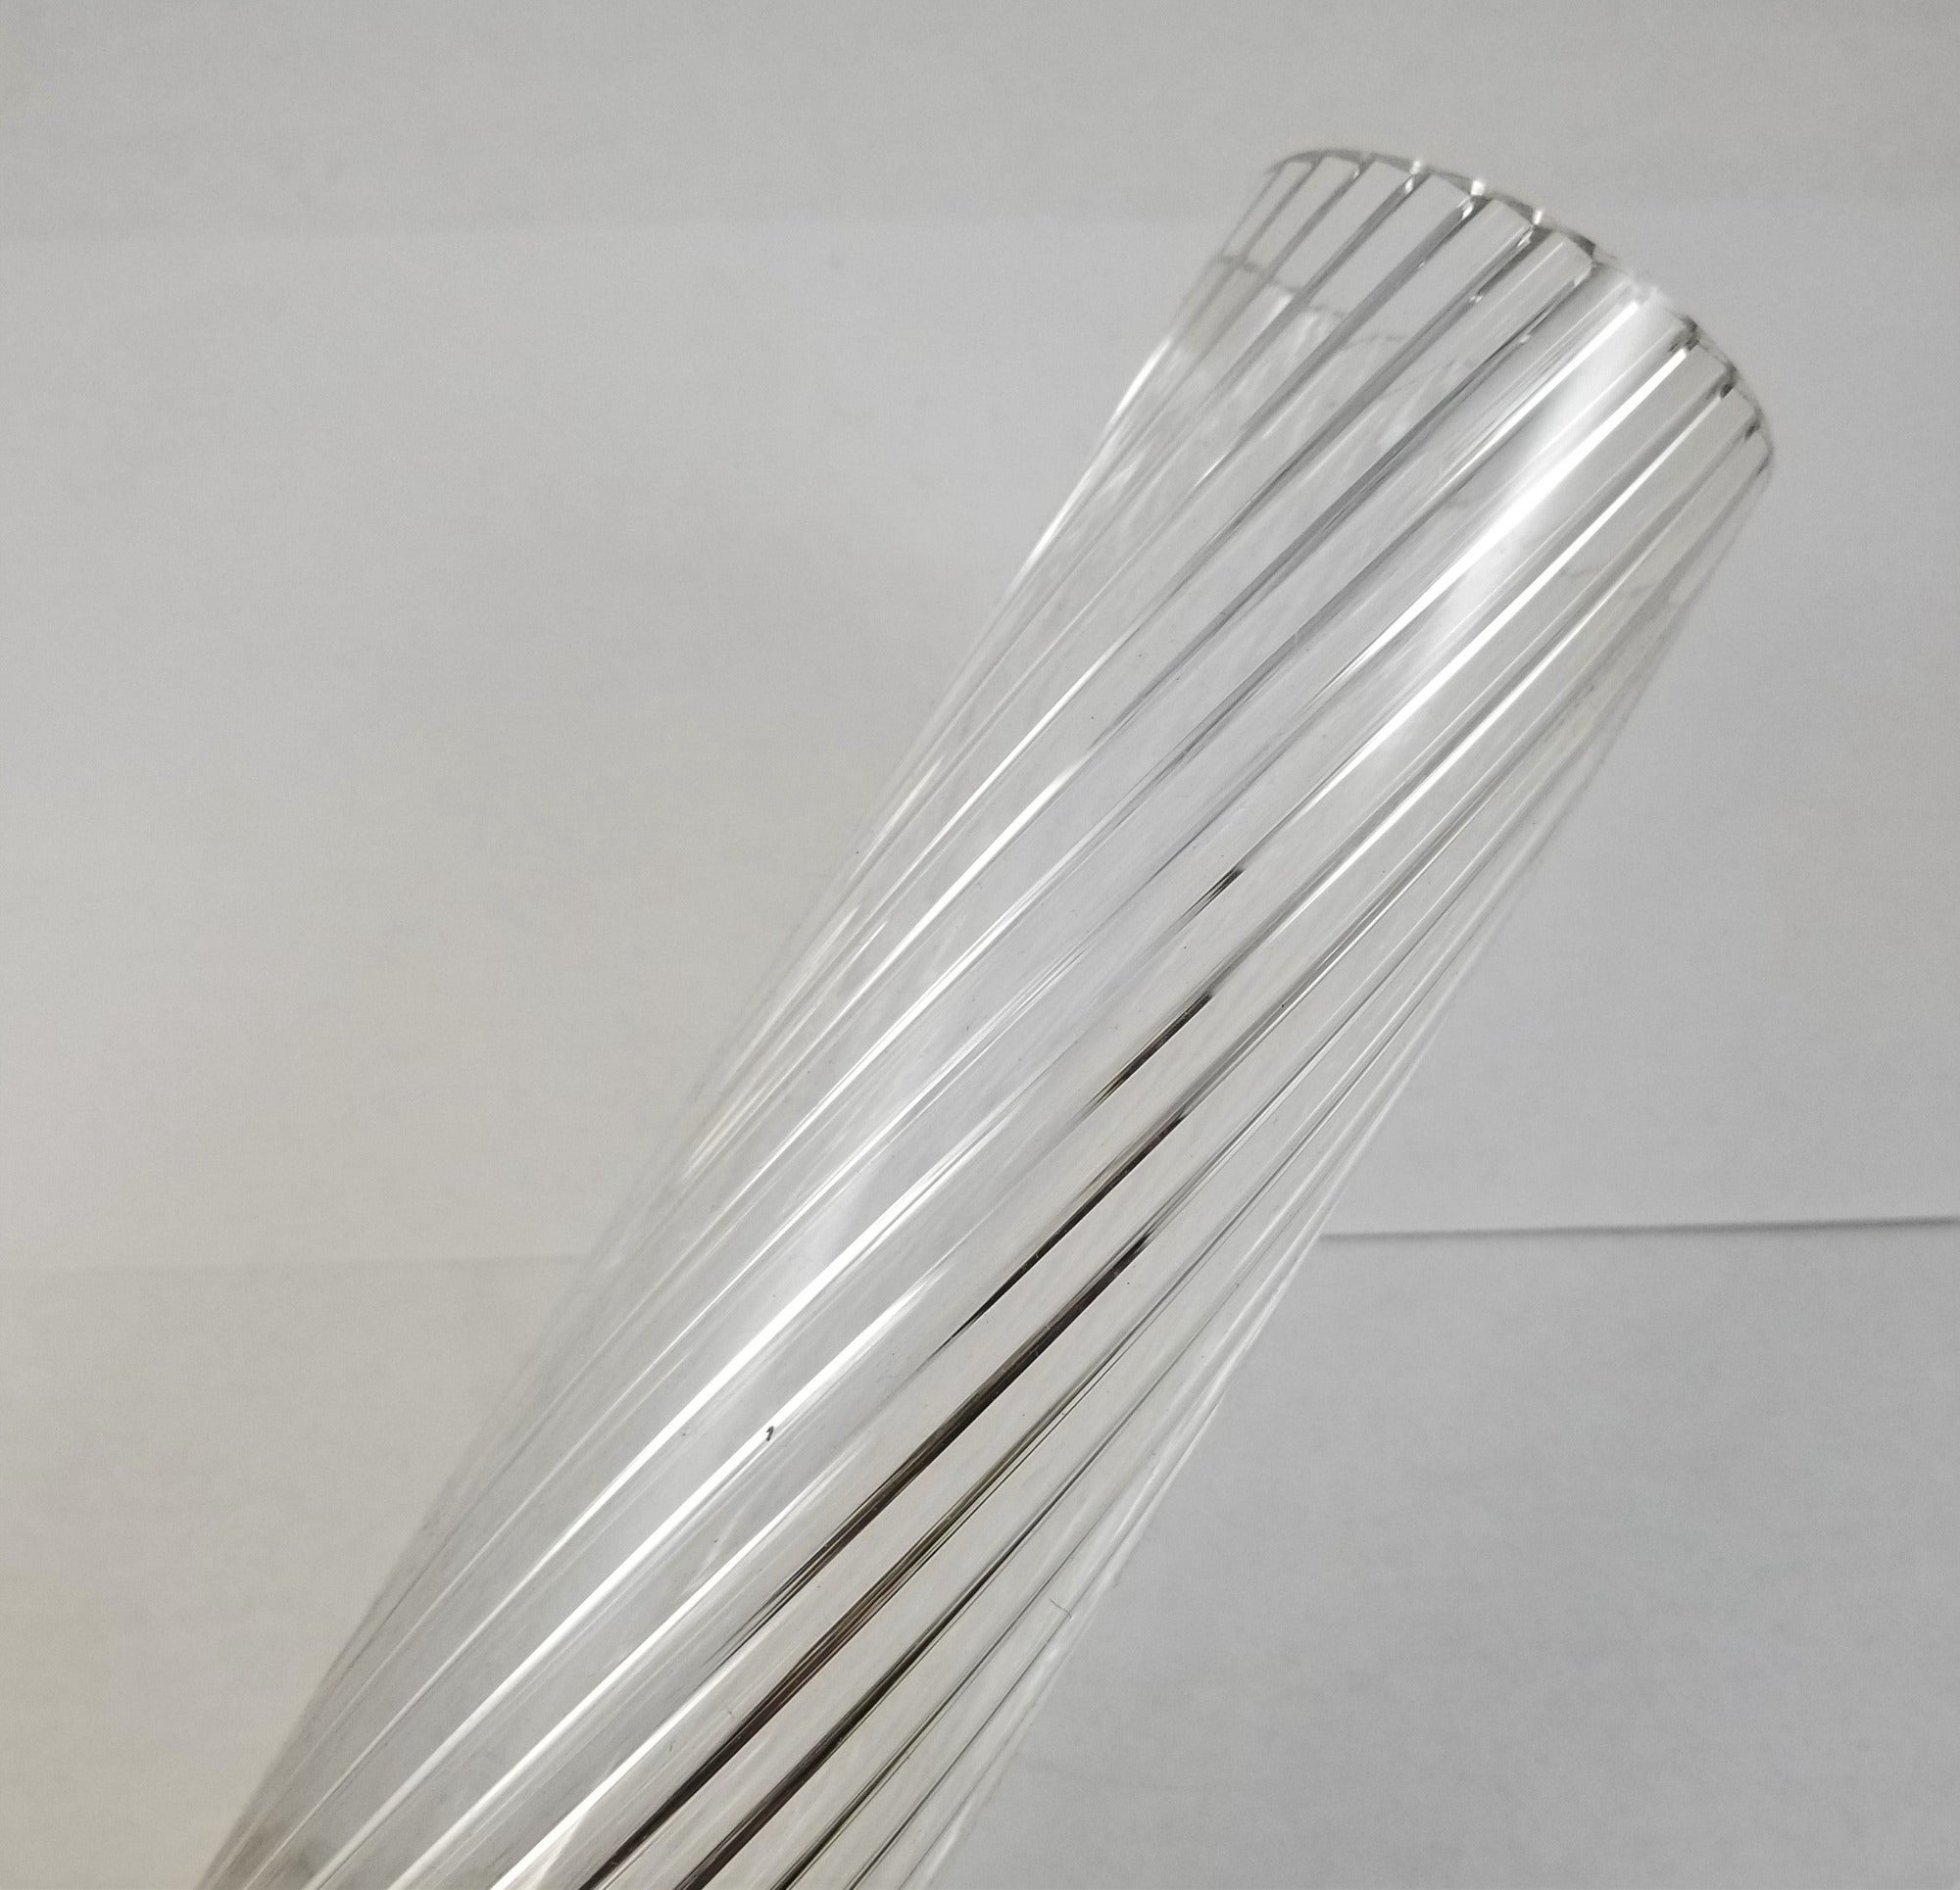 Plastic tube pipe with swirled design - 21 inches long